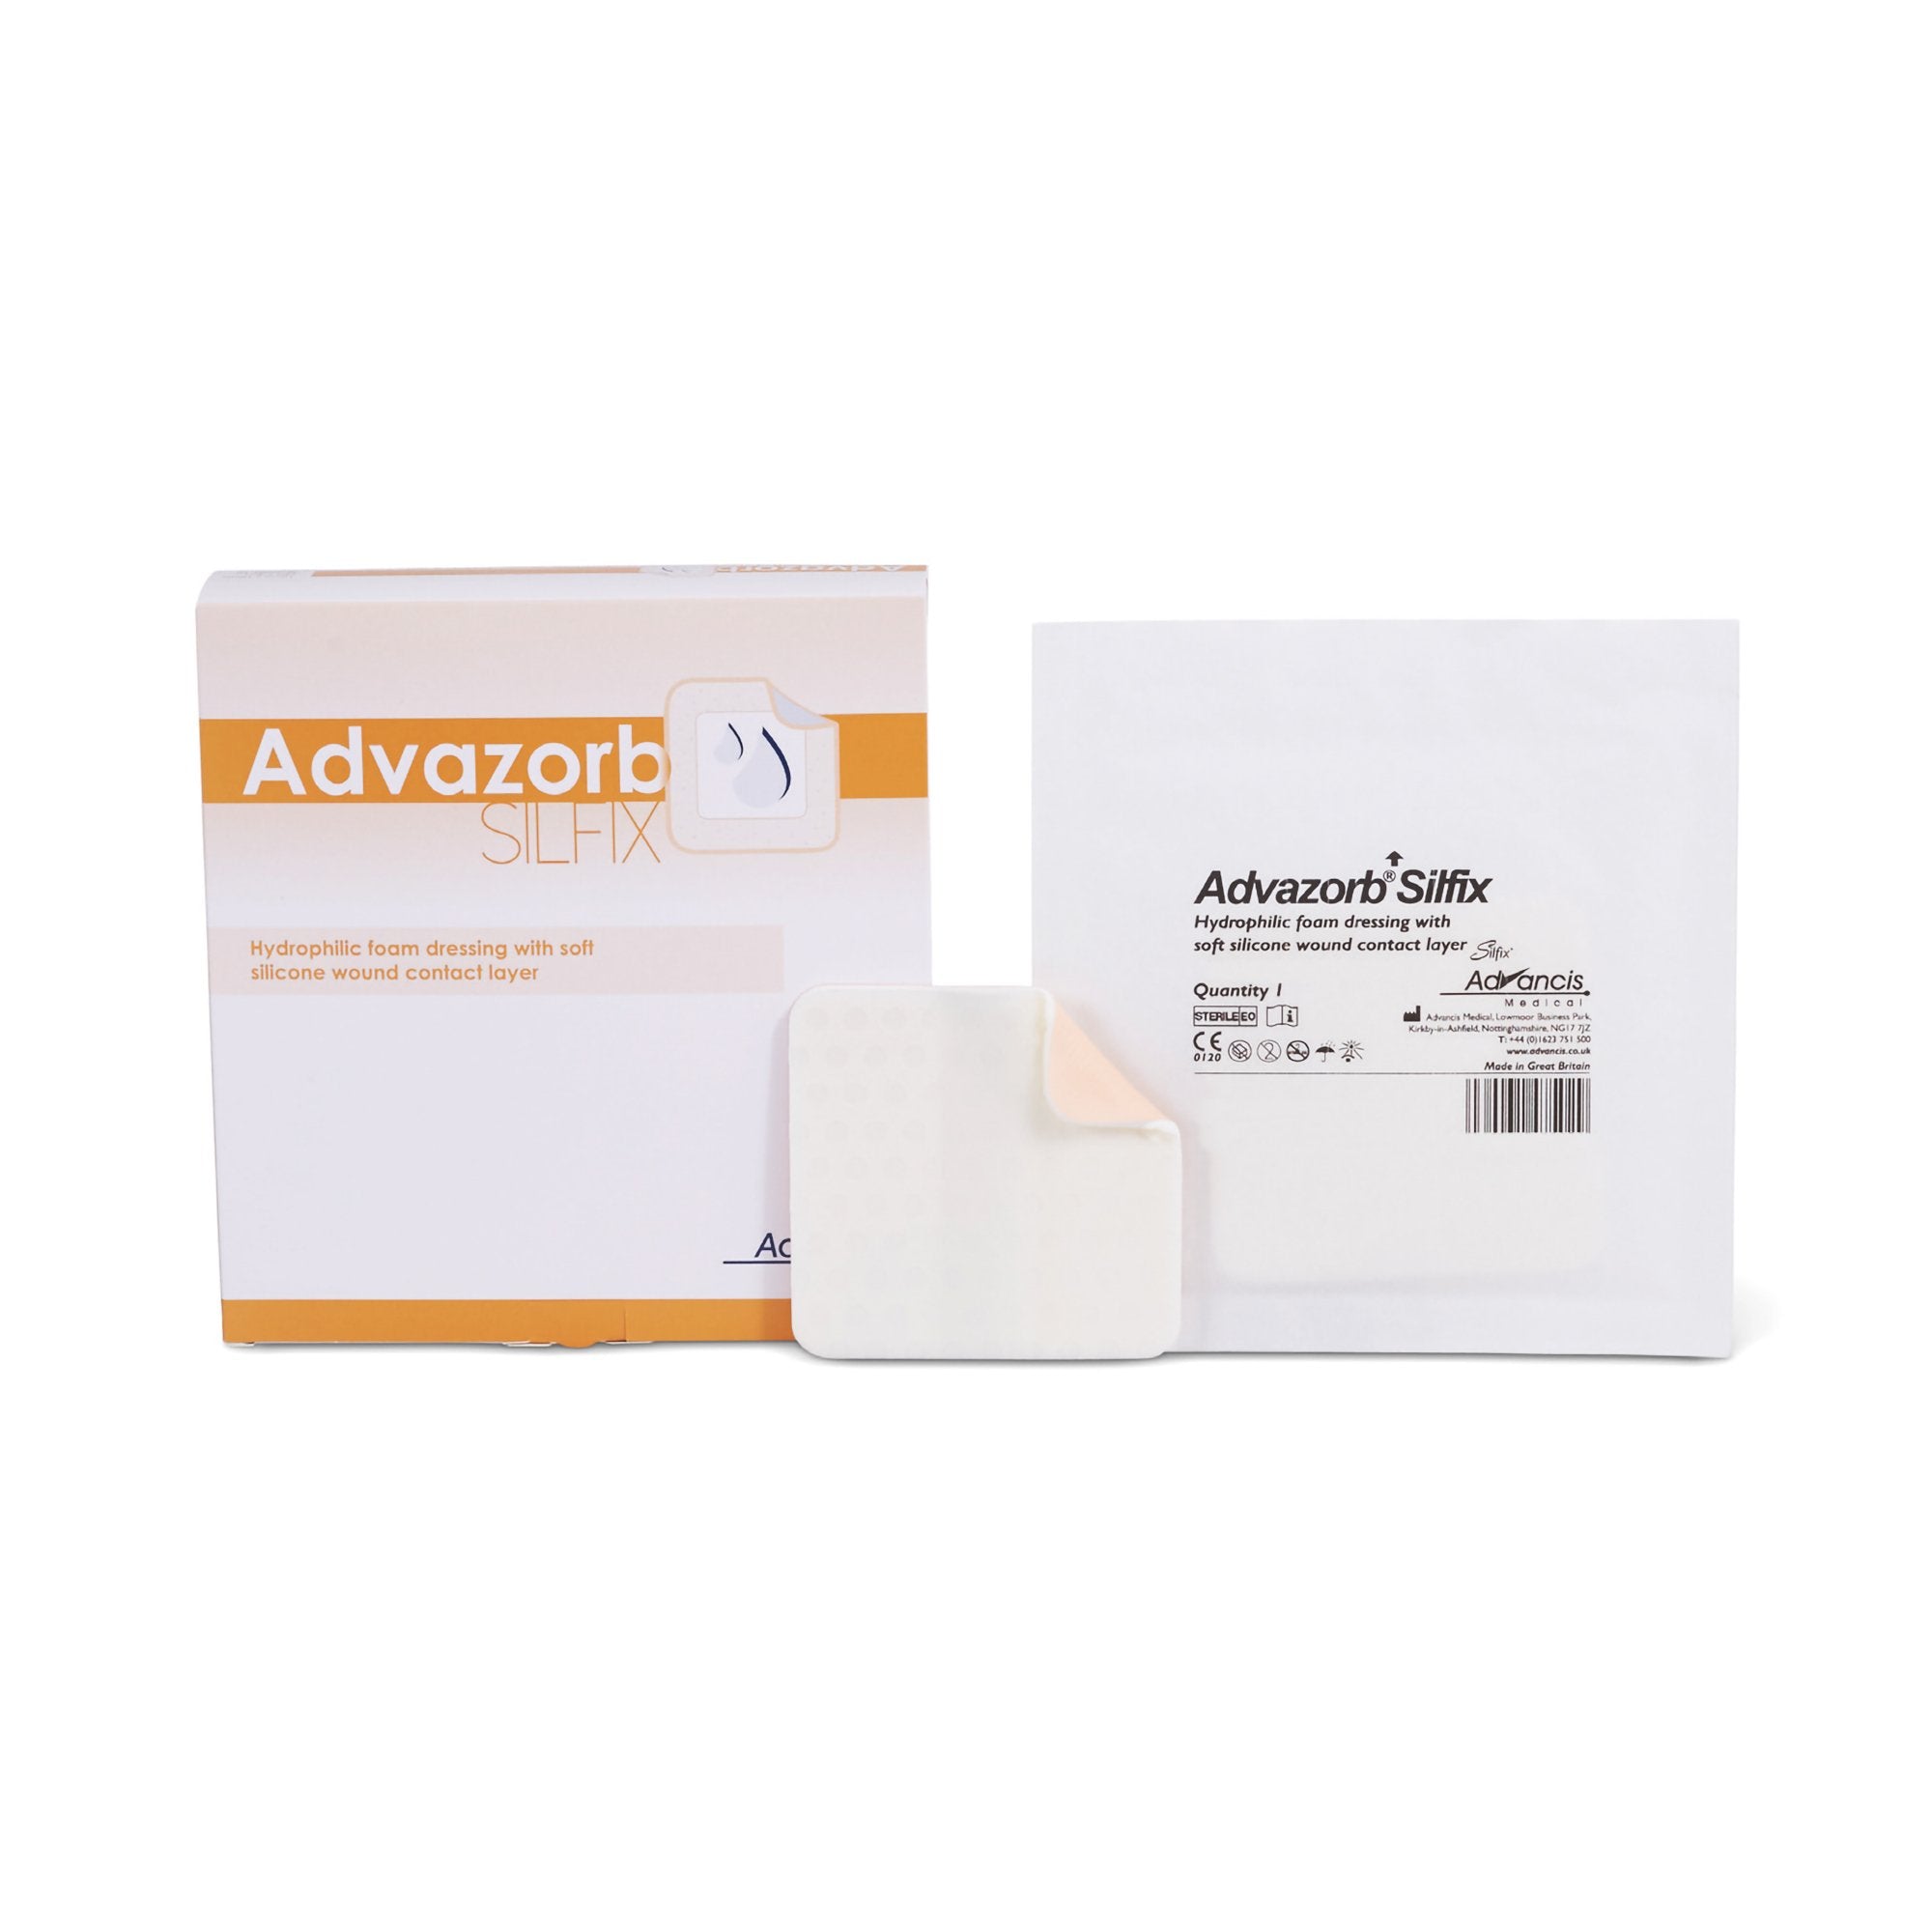 Foam Dressing Advazorb Silfix® 4 X 4 Inch Without Border Film Backing Silicone Face Square Sterile